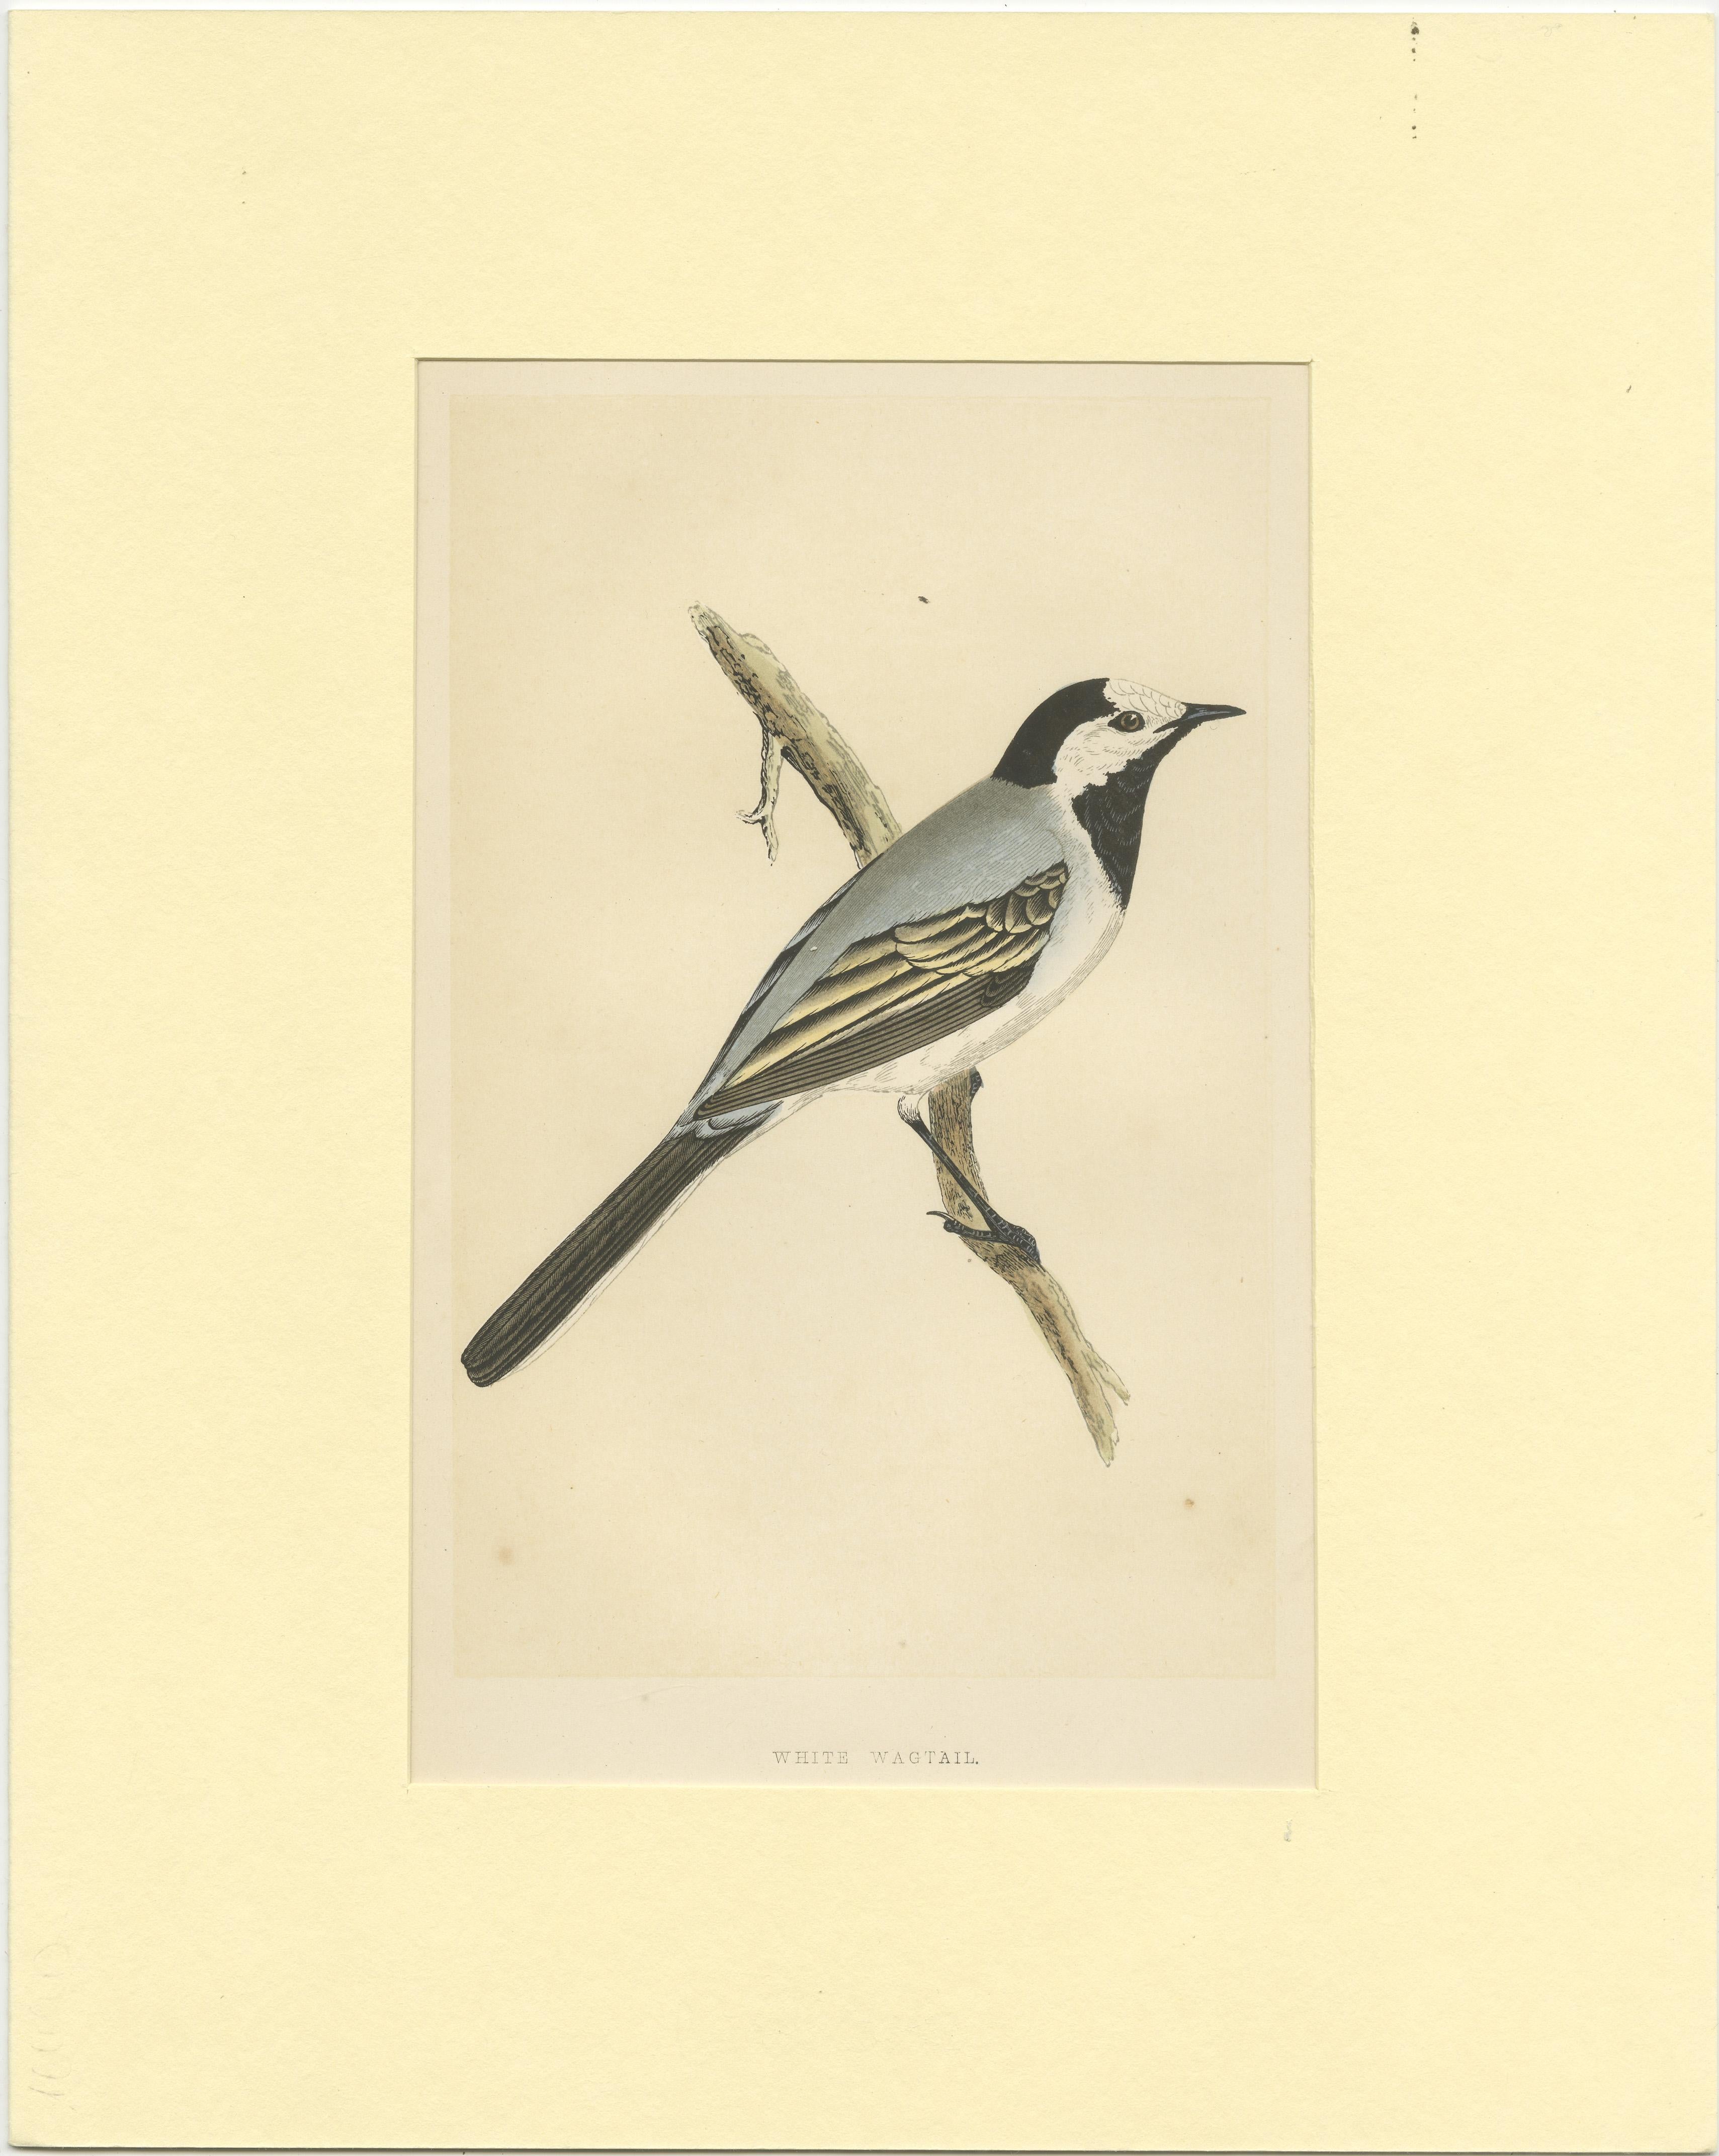 Original antique bird print of a white wagtail. This print originates from 